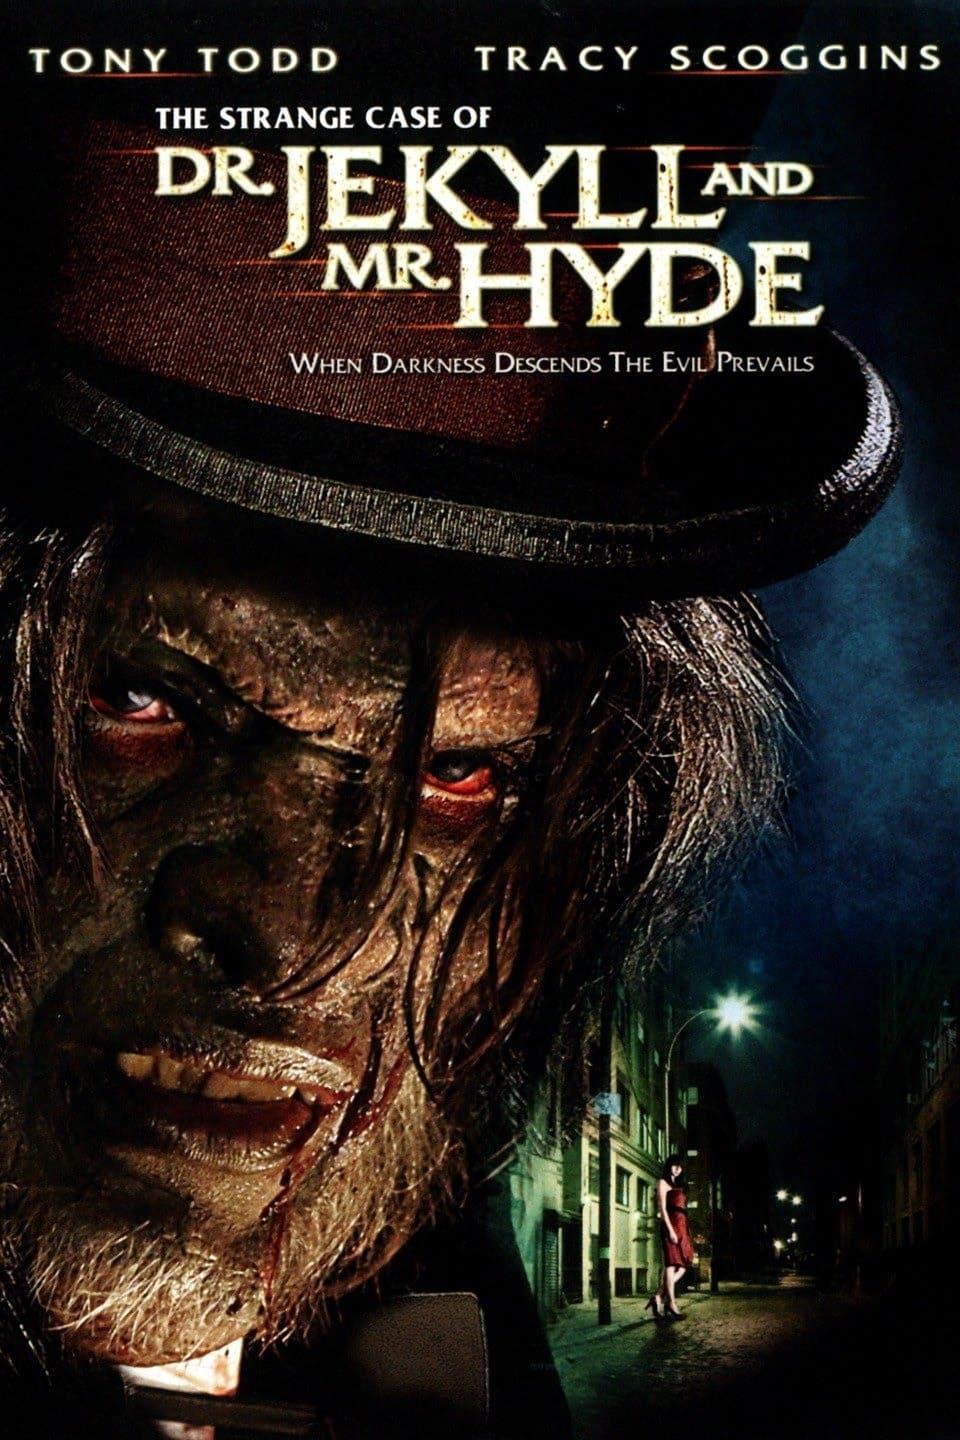 The Strange Case of Dr. Jekyll and Mr. Hyde poster